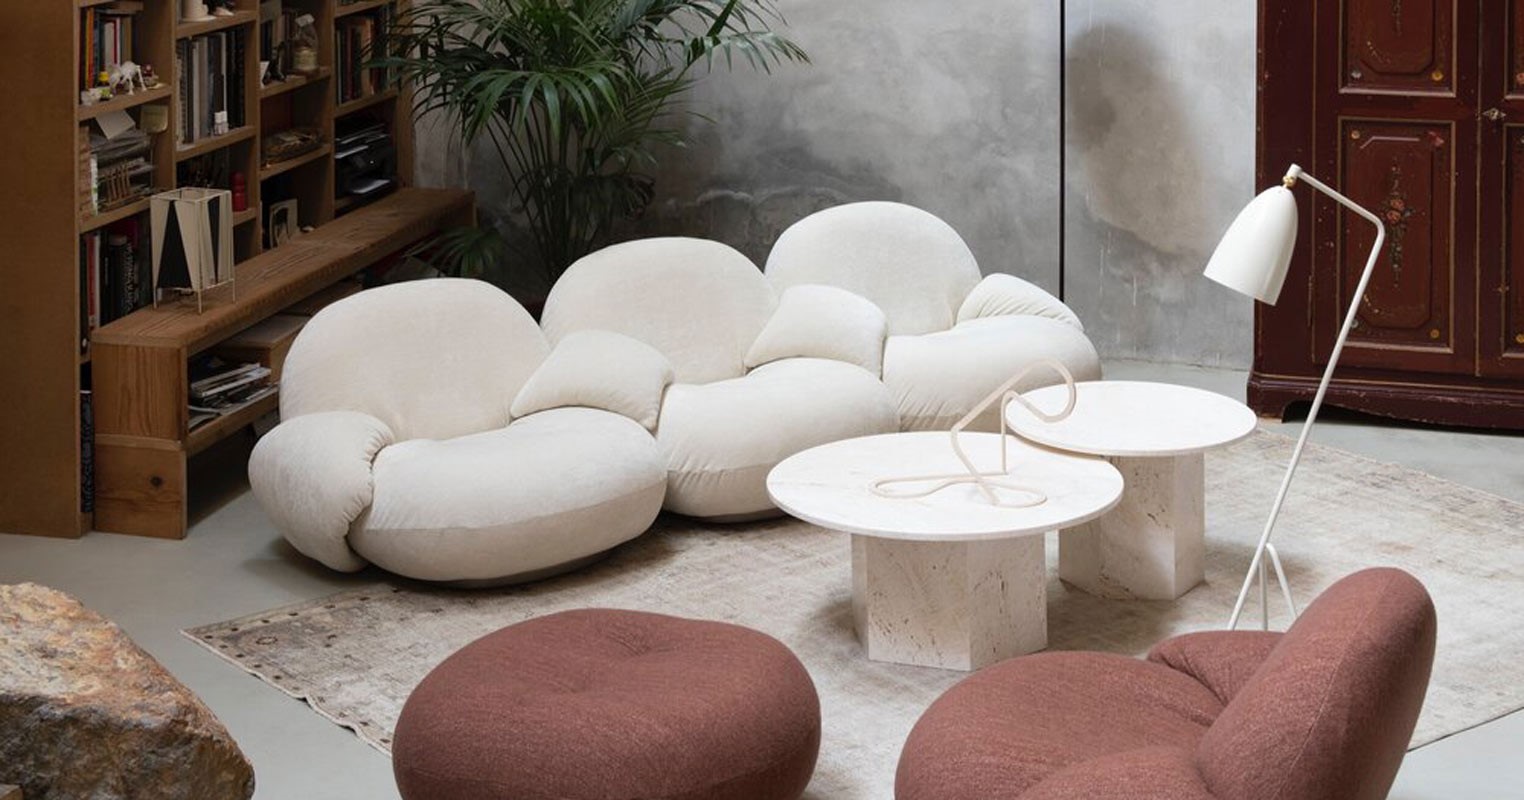 Round blocks create a highlight for the room